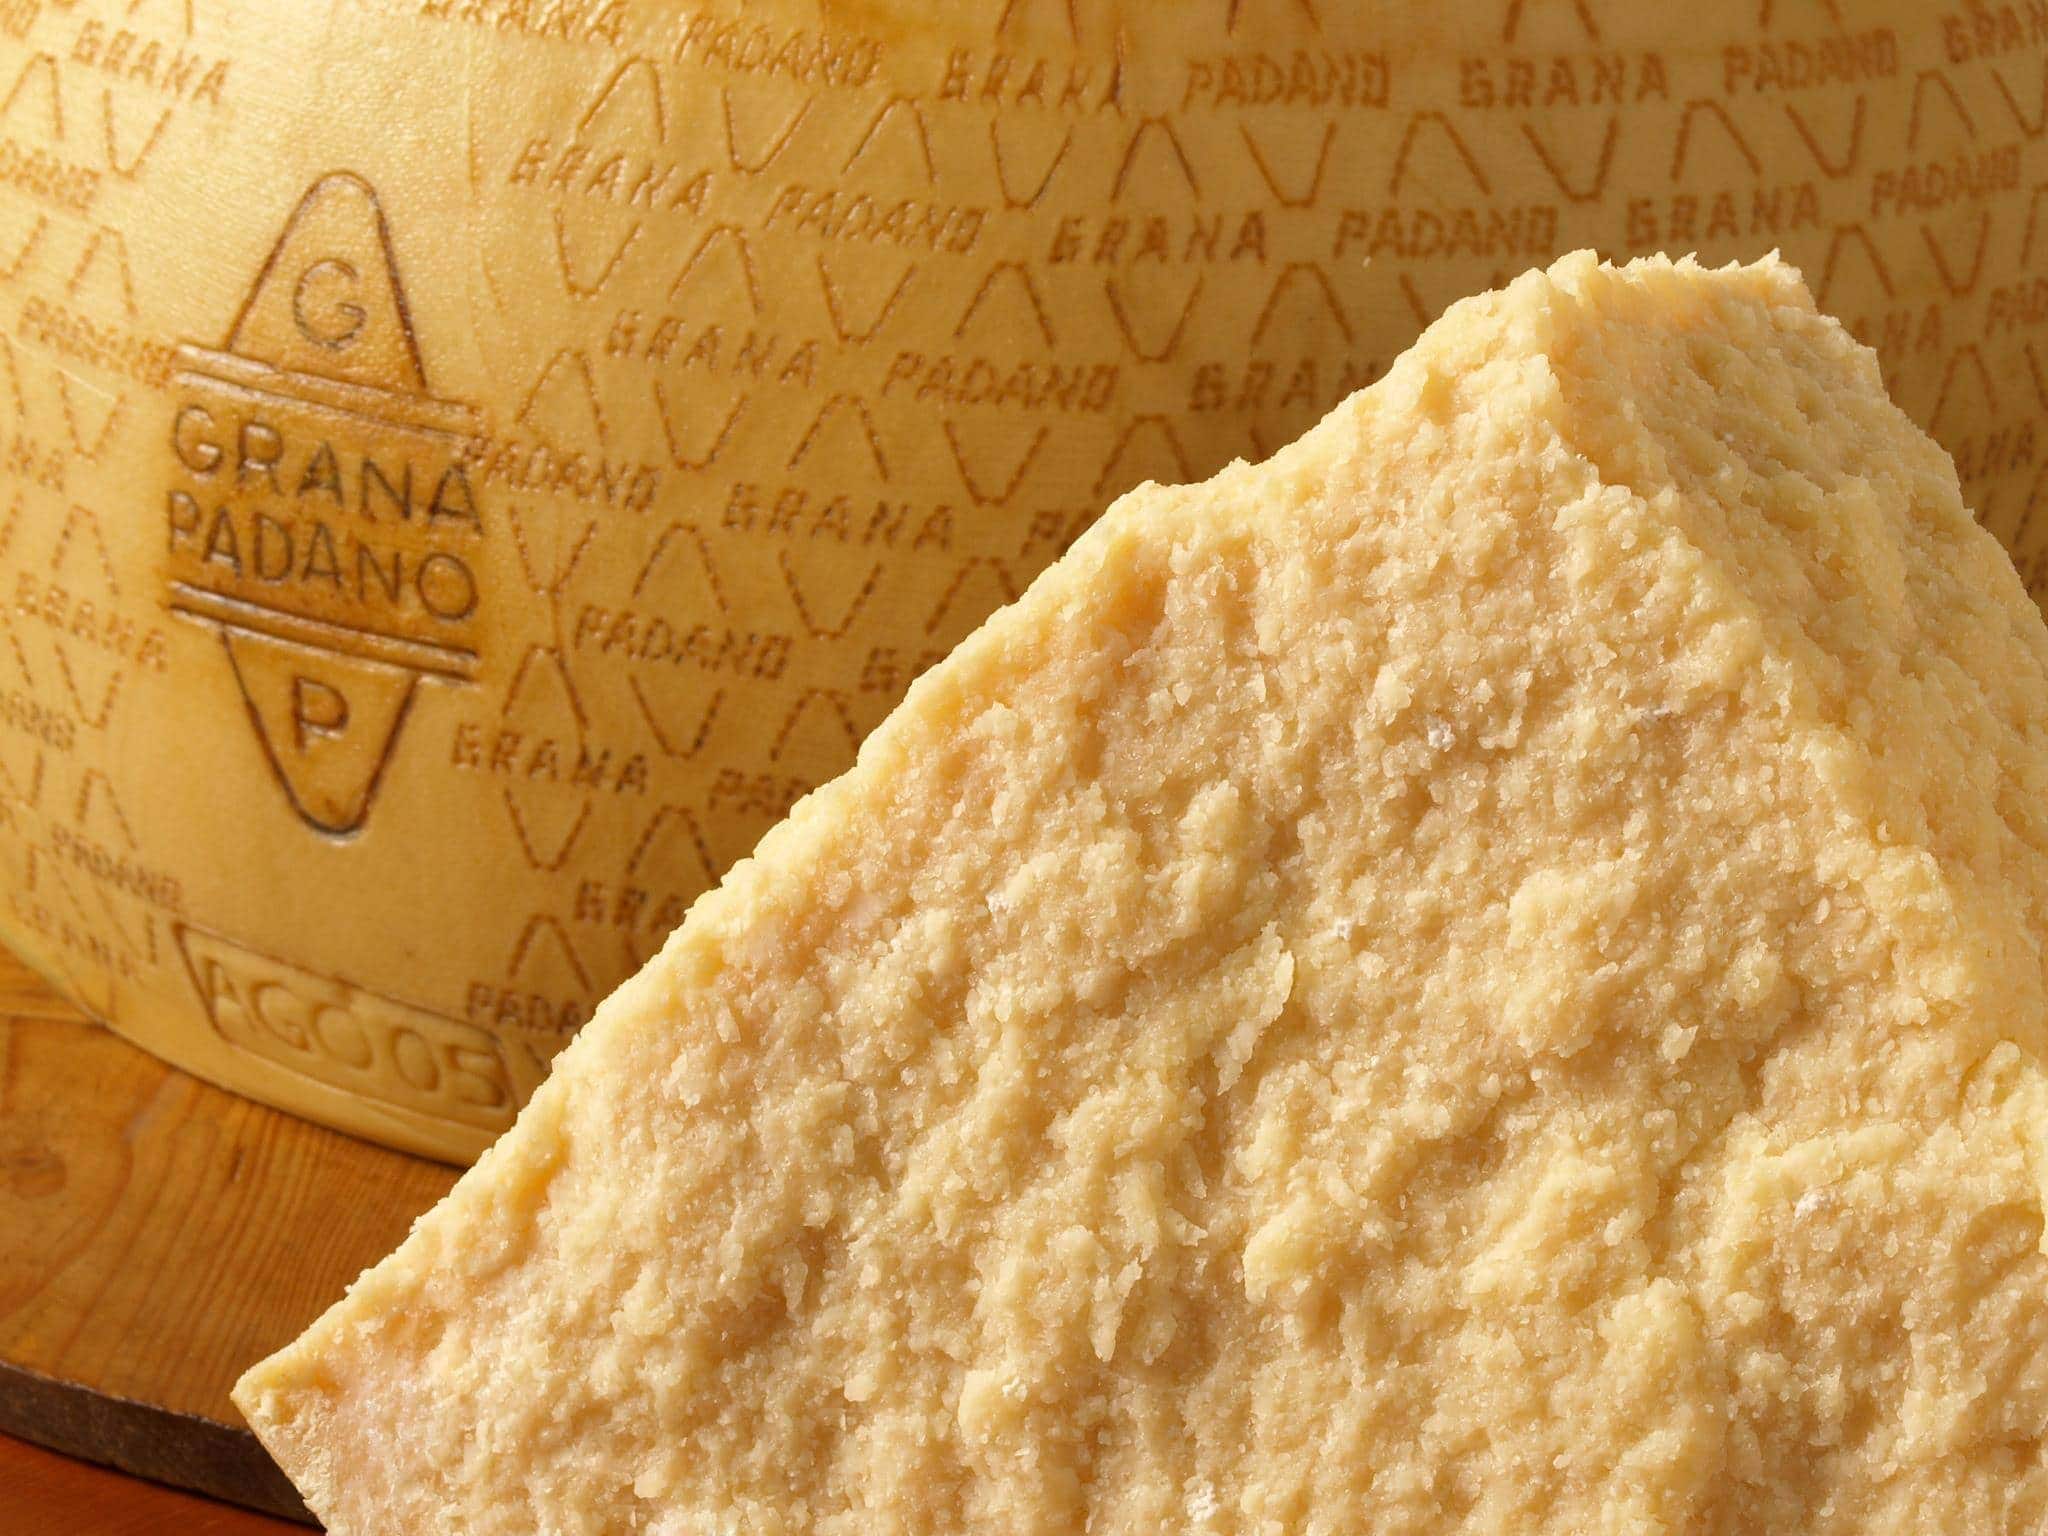 An Grana What Immensely Italian is Padano? Cheese Popular